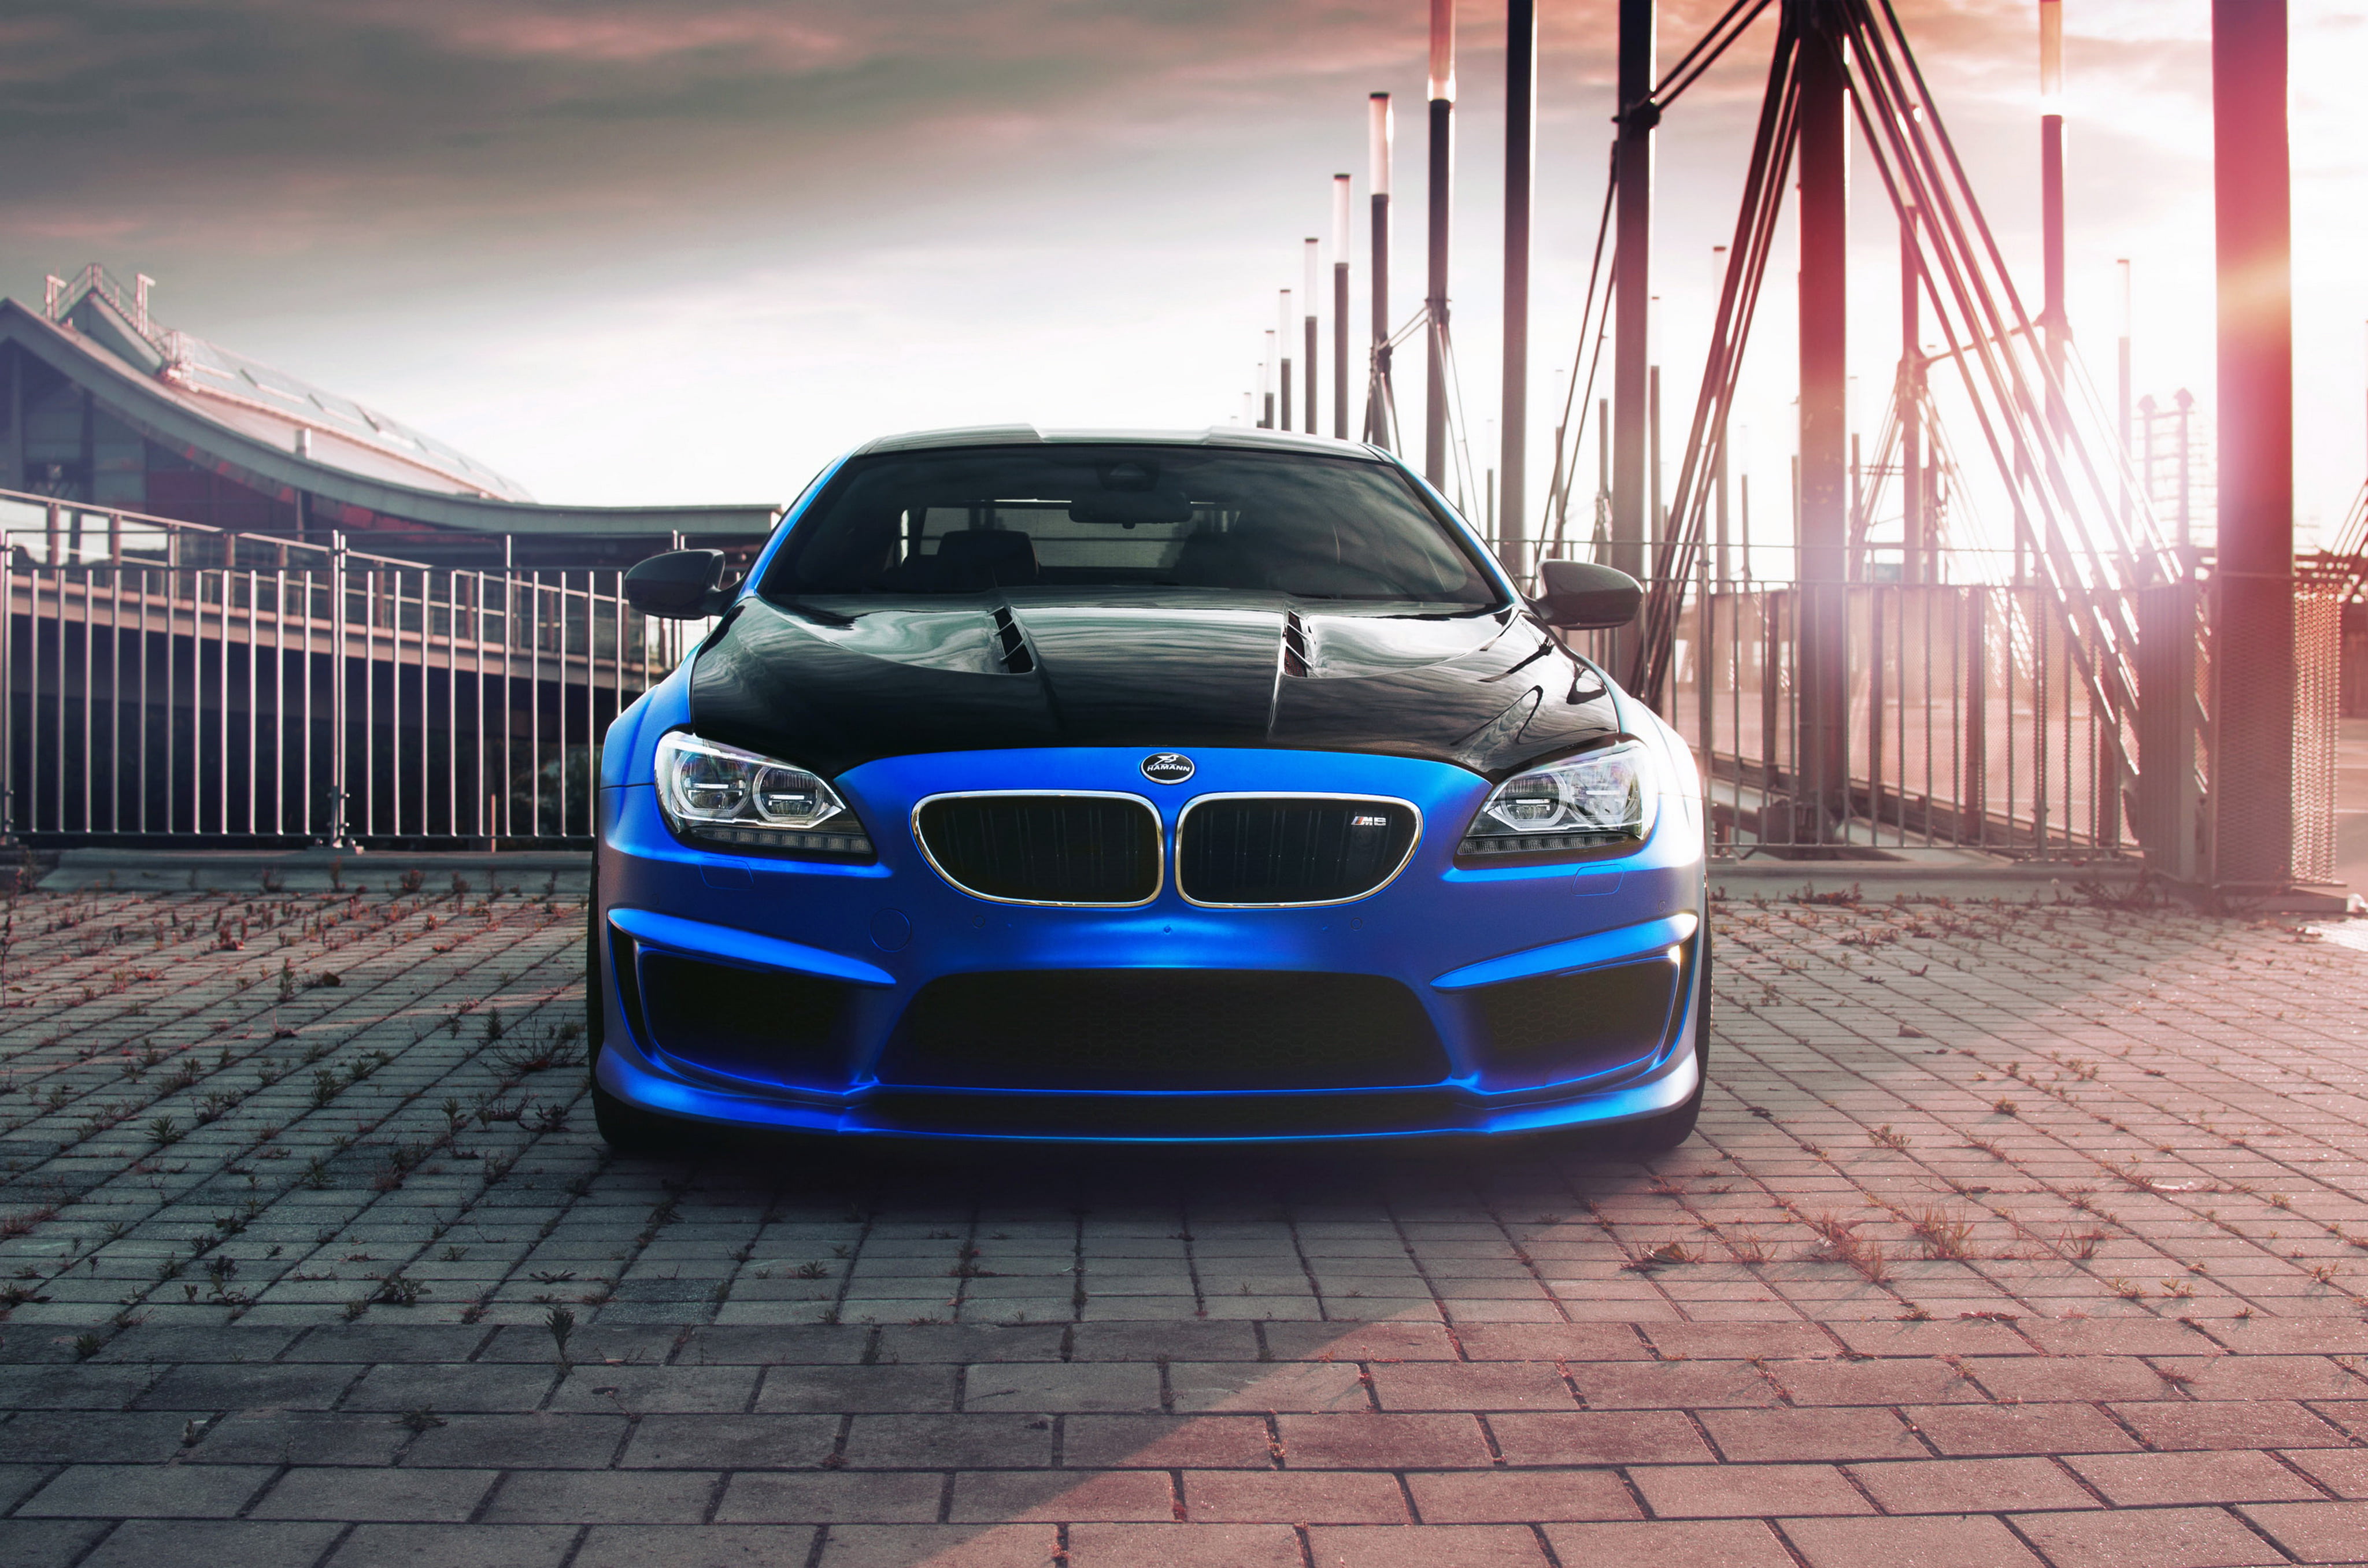 blue and black BMW vehicle, hamann, f13, front view, car, transportation